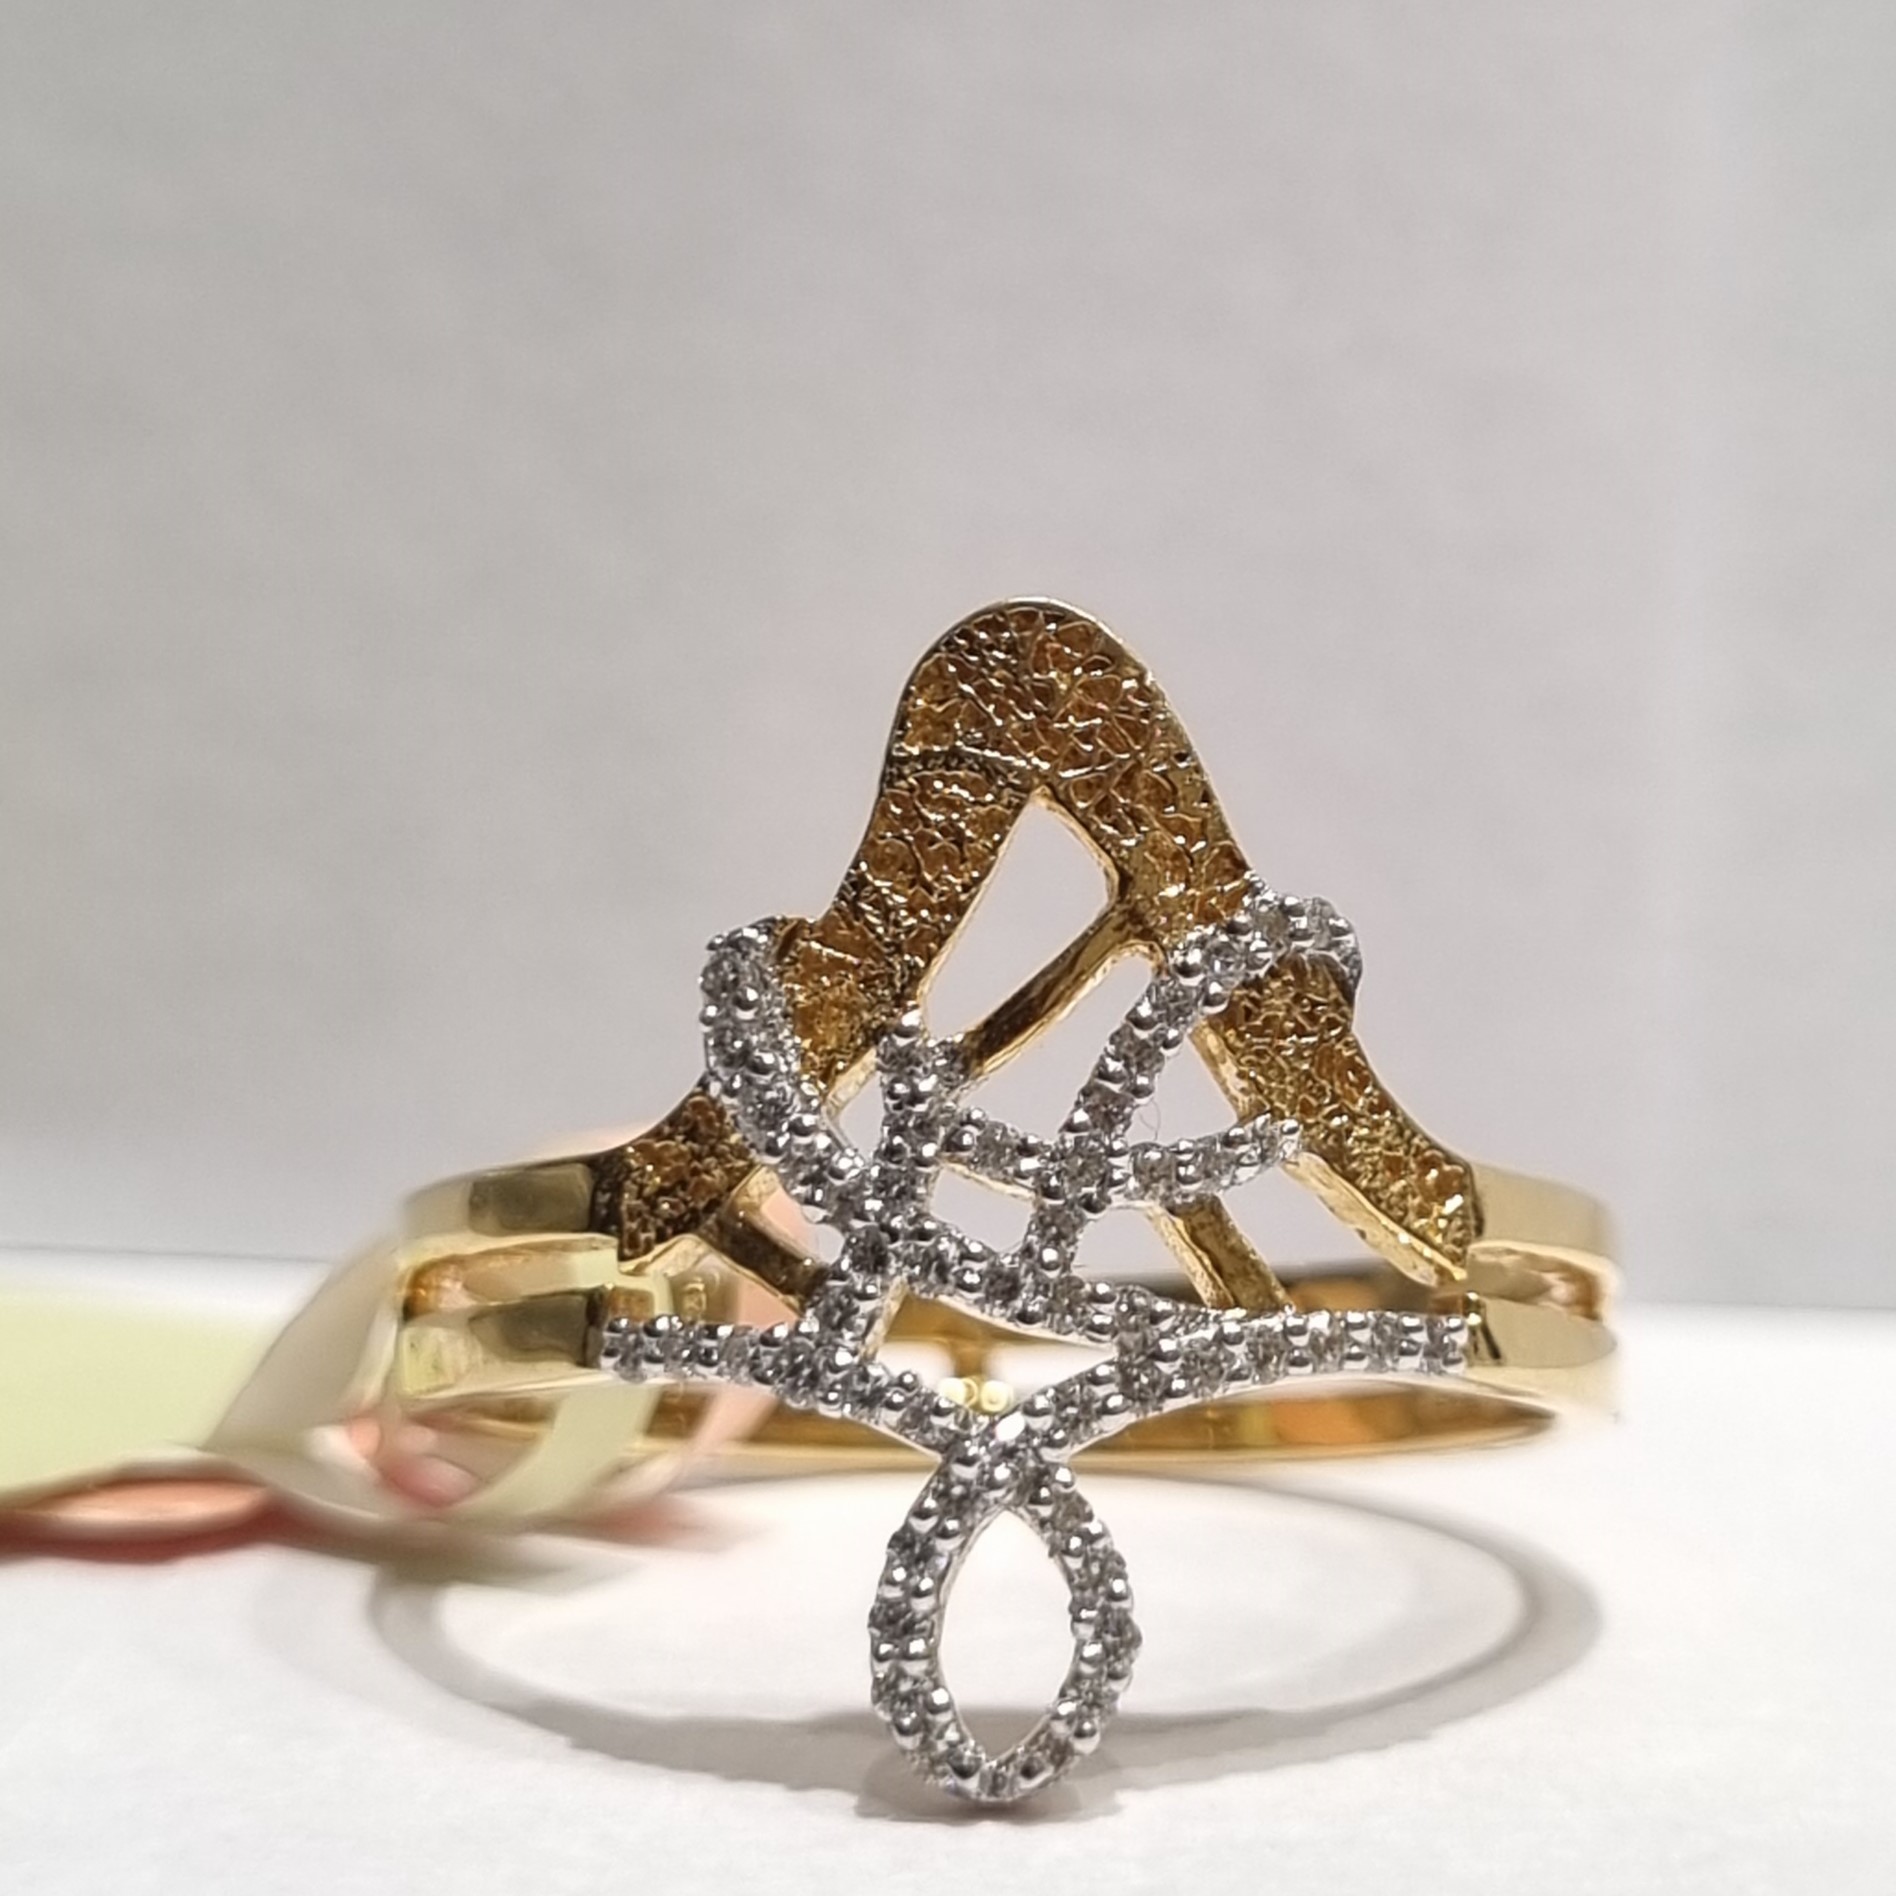 intricate jalii work ring